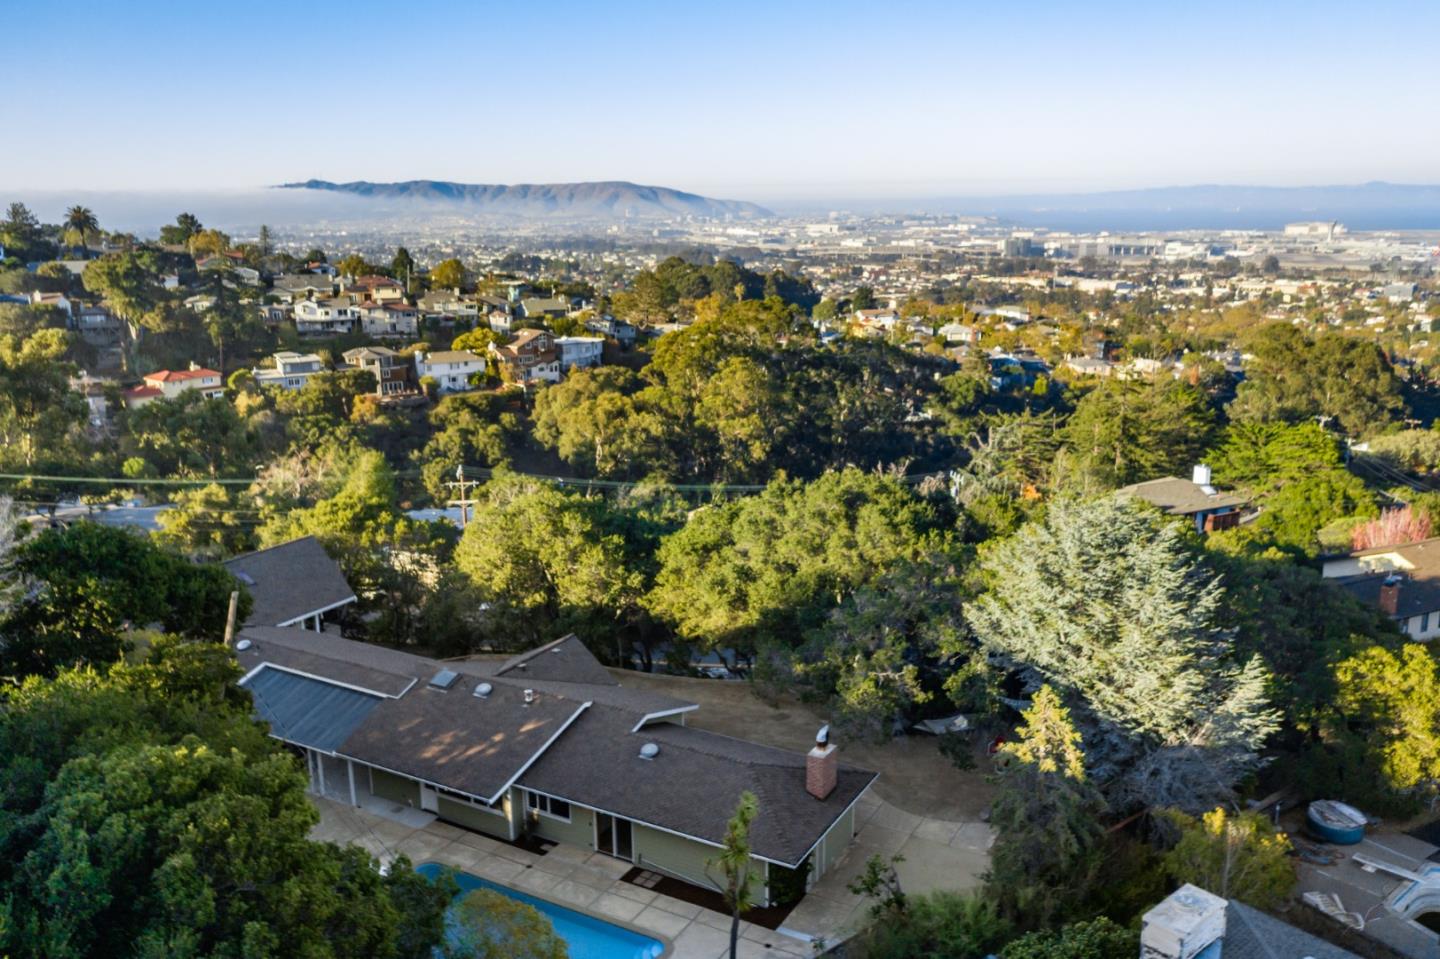 Tucked in the treetops above Millbrae Ave with airport/bay/east bay views thru the trees. Large calm home with lots of space & great natural light on a tree-lined half+ acre lot with a large level area, pool, an in-law unit, & a large detached workshop of ~600 sf. Need space for multi-generations, a home office, & a large workshop for a home-based business? This home would be ideal.  Convenient one-level living: formal entry, bright & spacious kitchen for multiple cooks, open floor plan, dining with floor-to-ceiling windows, home office with beautiful french doors, an enormous living area for large gatherings that can overflow outside. Primary suite opens onto the pool area, dual bedrooms w/ power skylights with black-out shades. Beautiful in-law unit in the trees with private access, kitchen, dining, living, bath & laundry room. Two car garage, storage room & huge workshop.  This is a flexible-use property that will serve many needs. 2 full kitchens, 2 laundry rooms- lots of options.